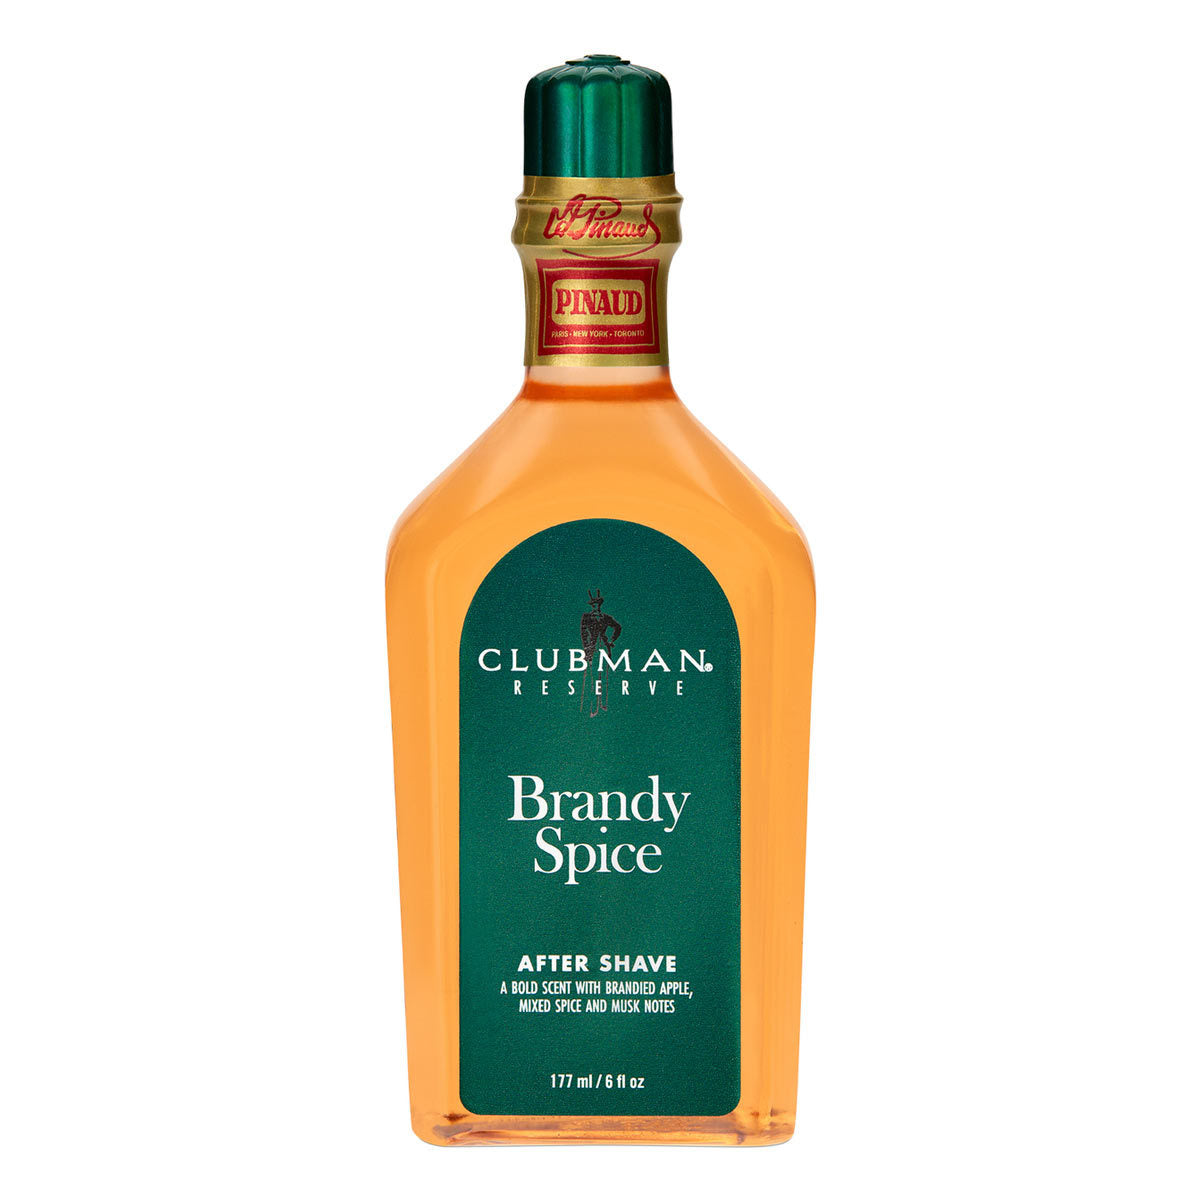 Primary image of Brandy Spice Aftershave